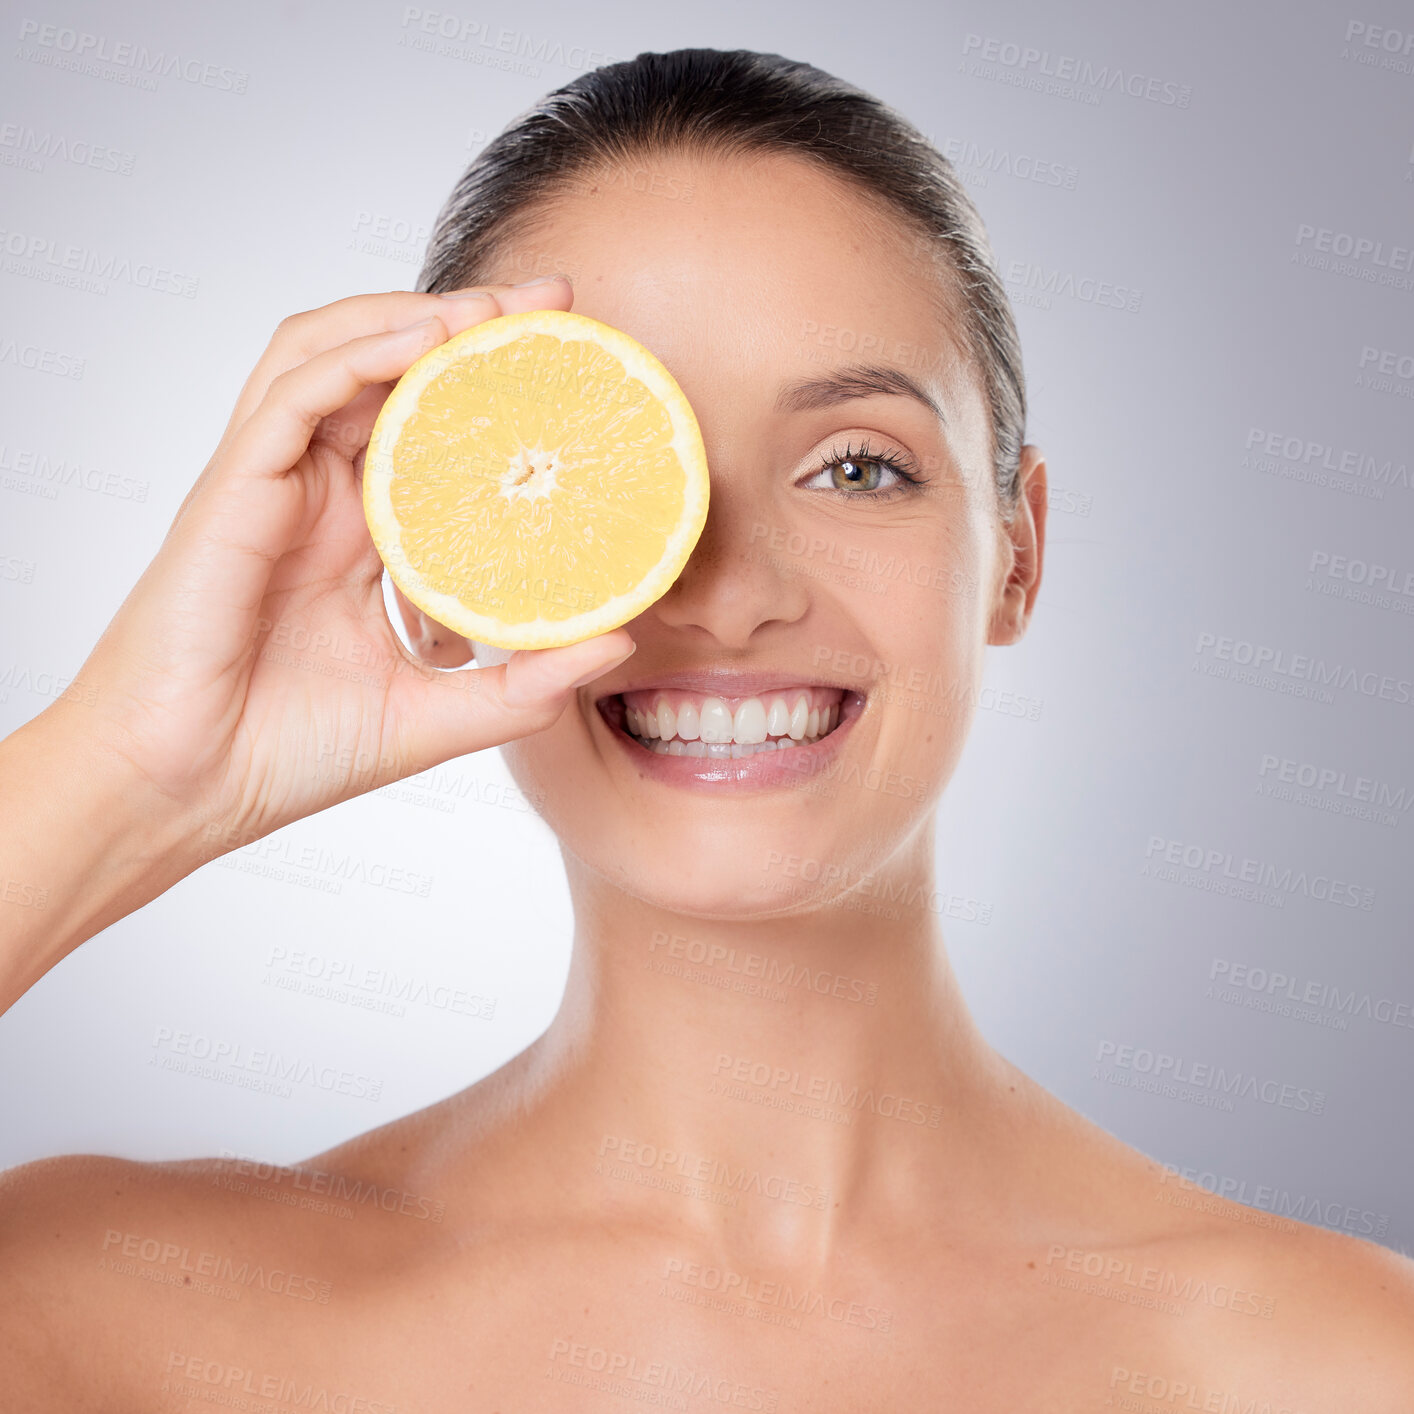 Buy stock photo Shot of a beautiful young woman holding a lemon against a grey background